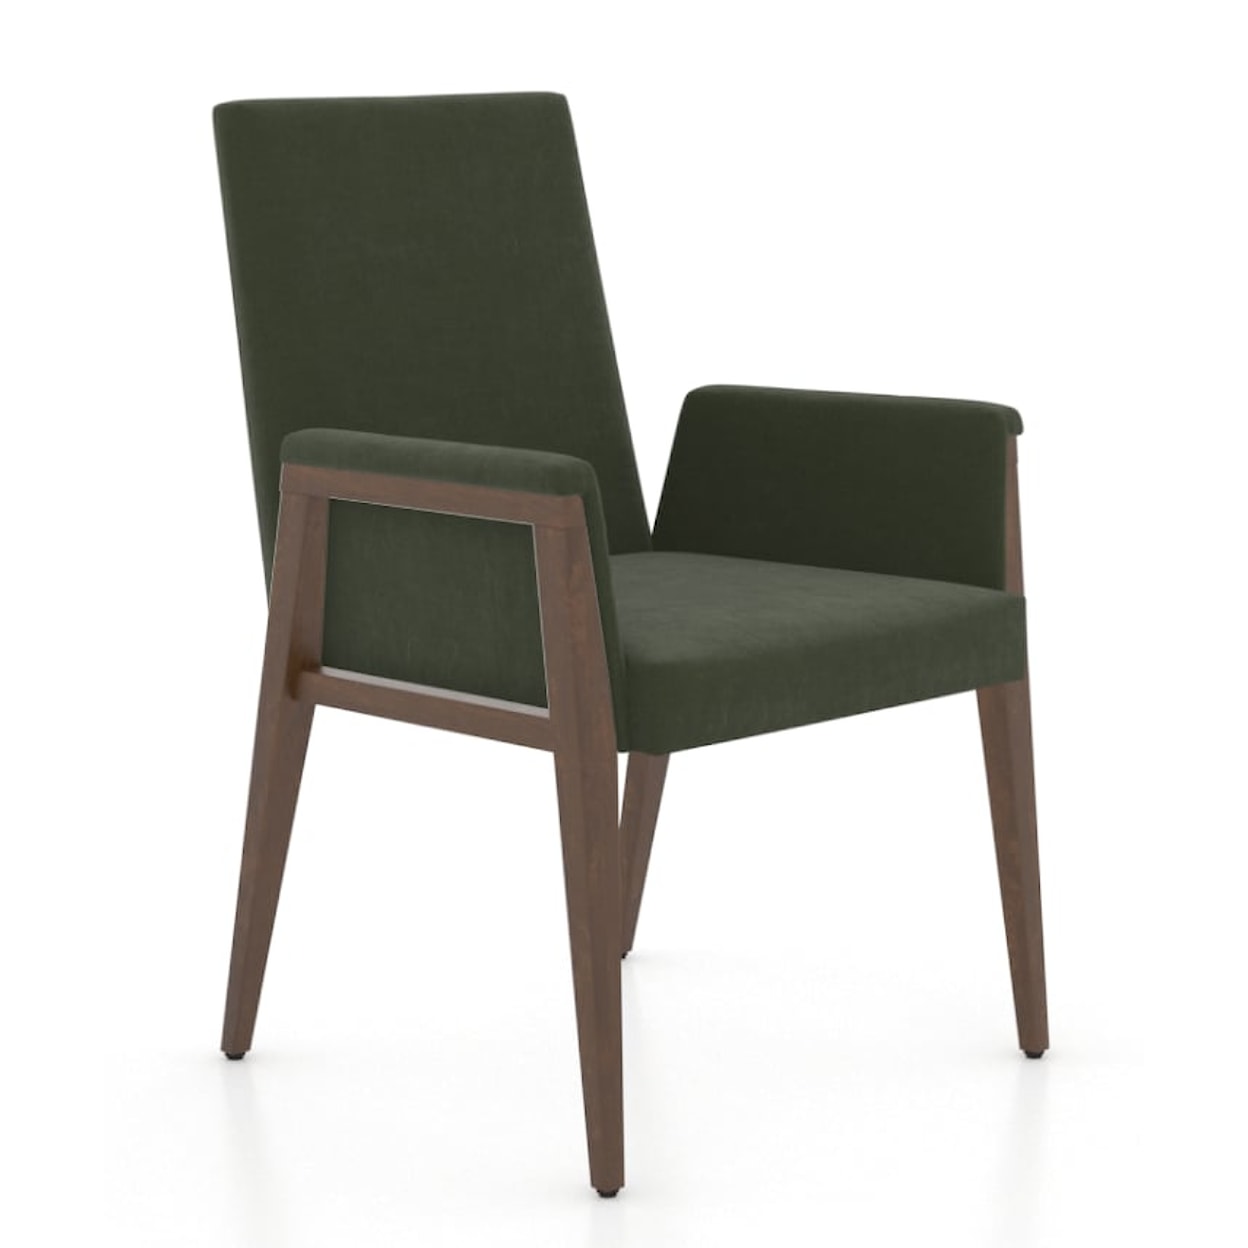 Canadel Dining Sets 5177 Dining Chair